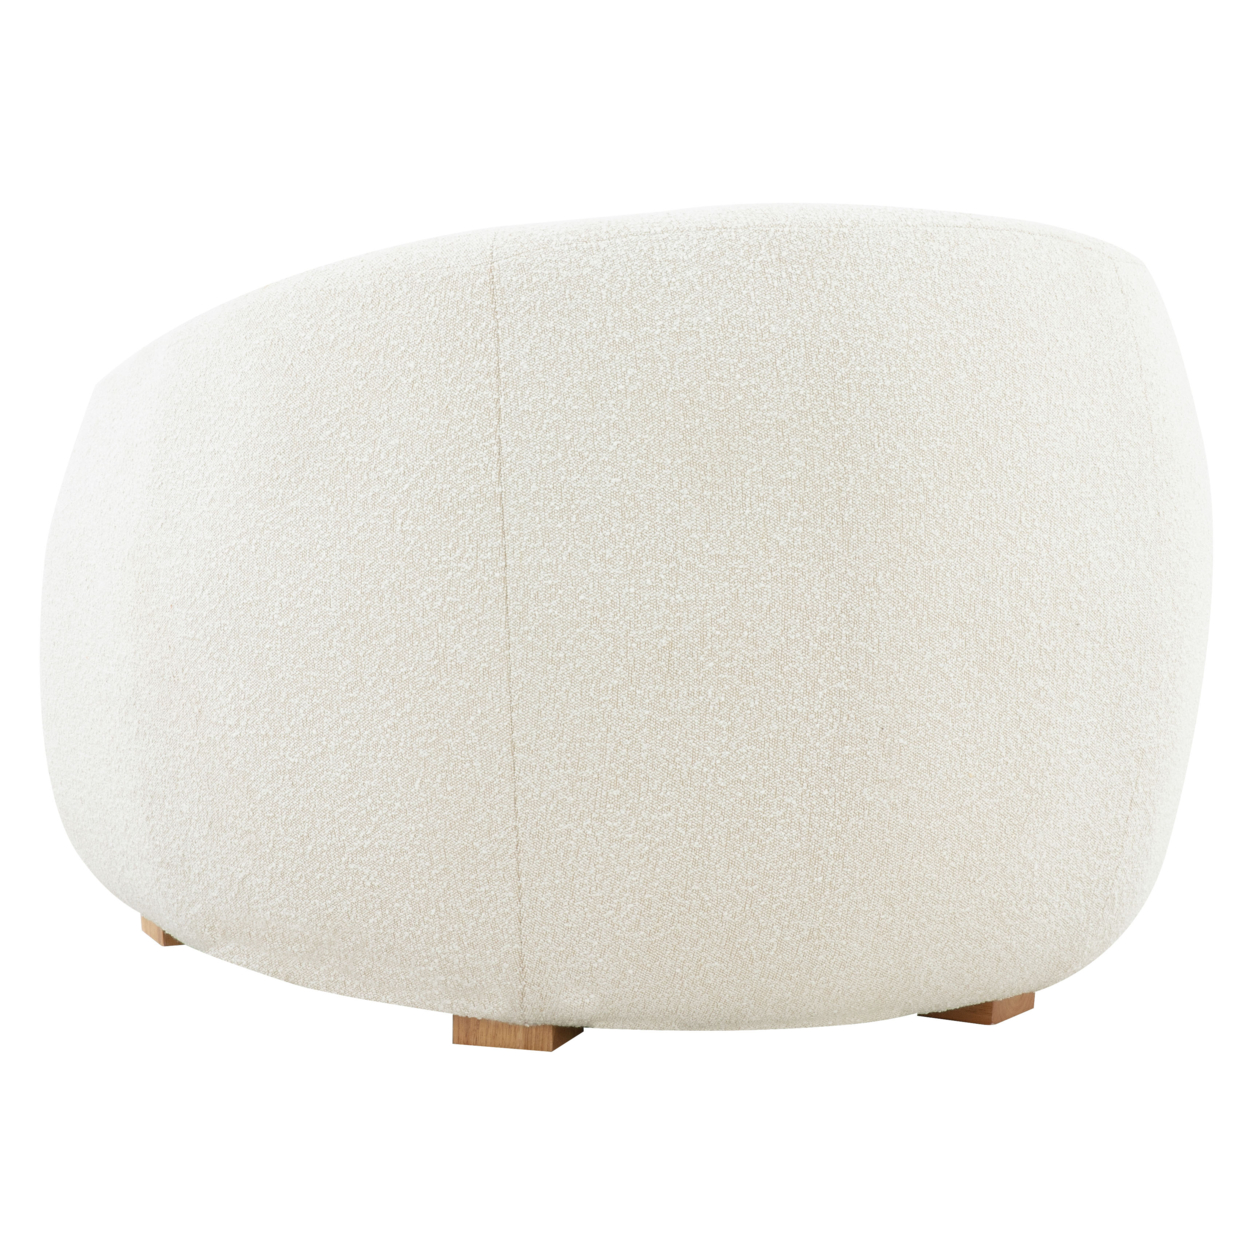 SAFAVIEH COUTURE Emiliana Boucle Accent Chair Ivory